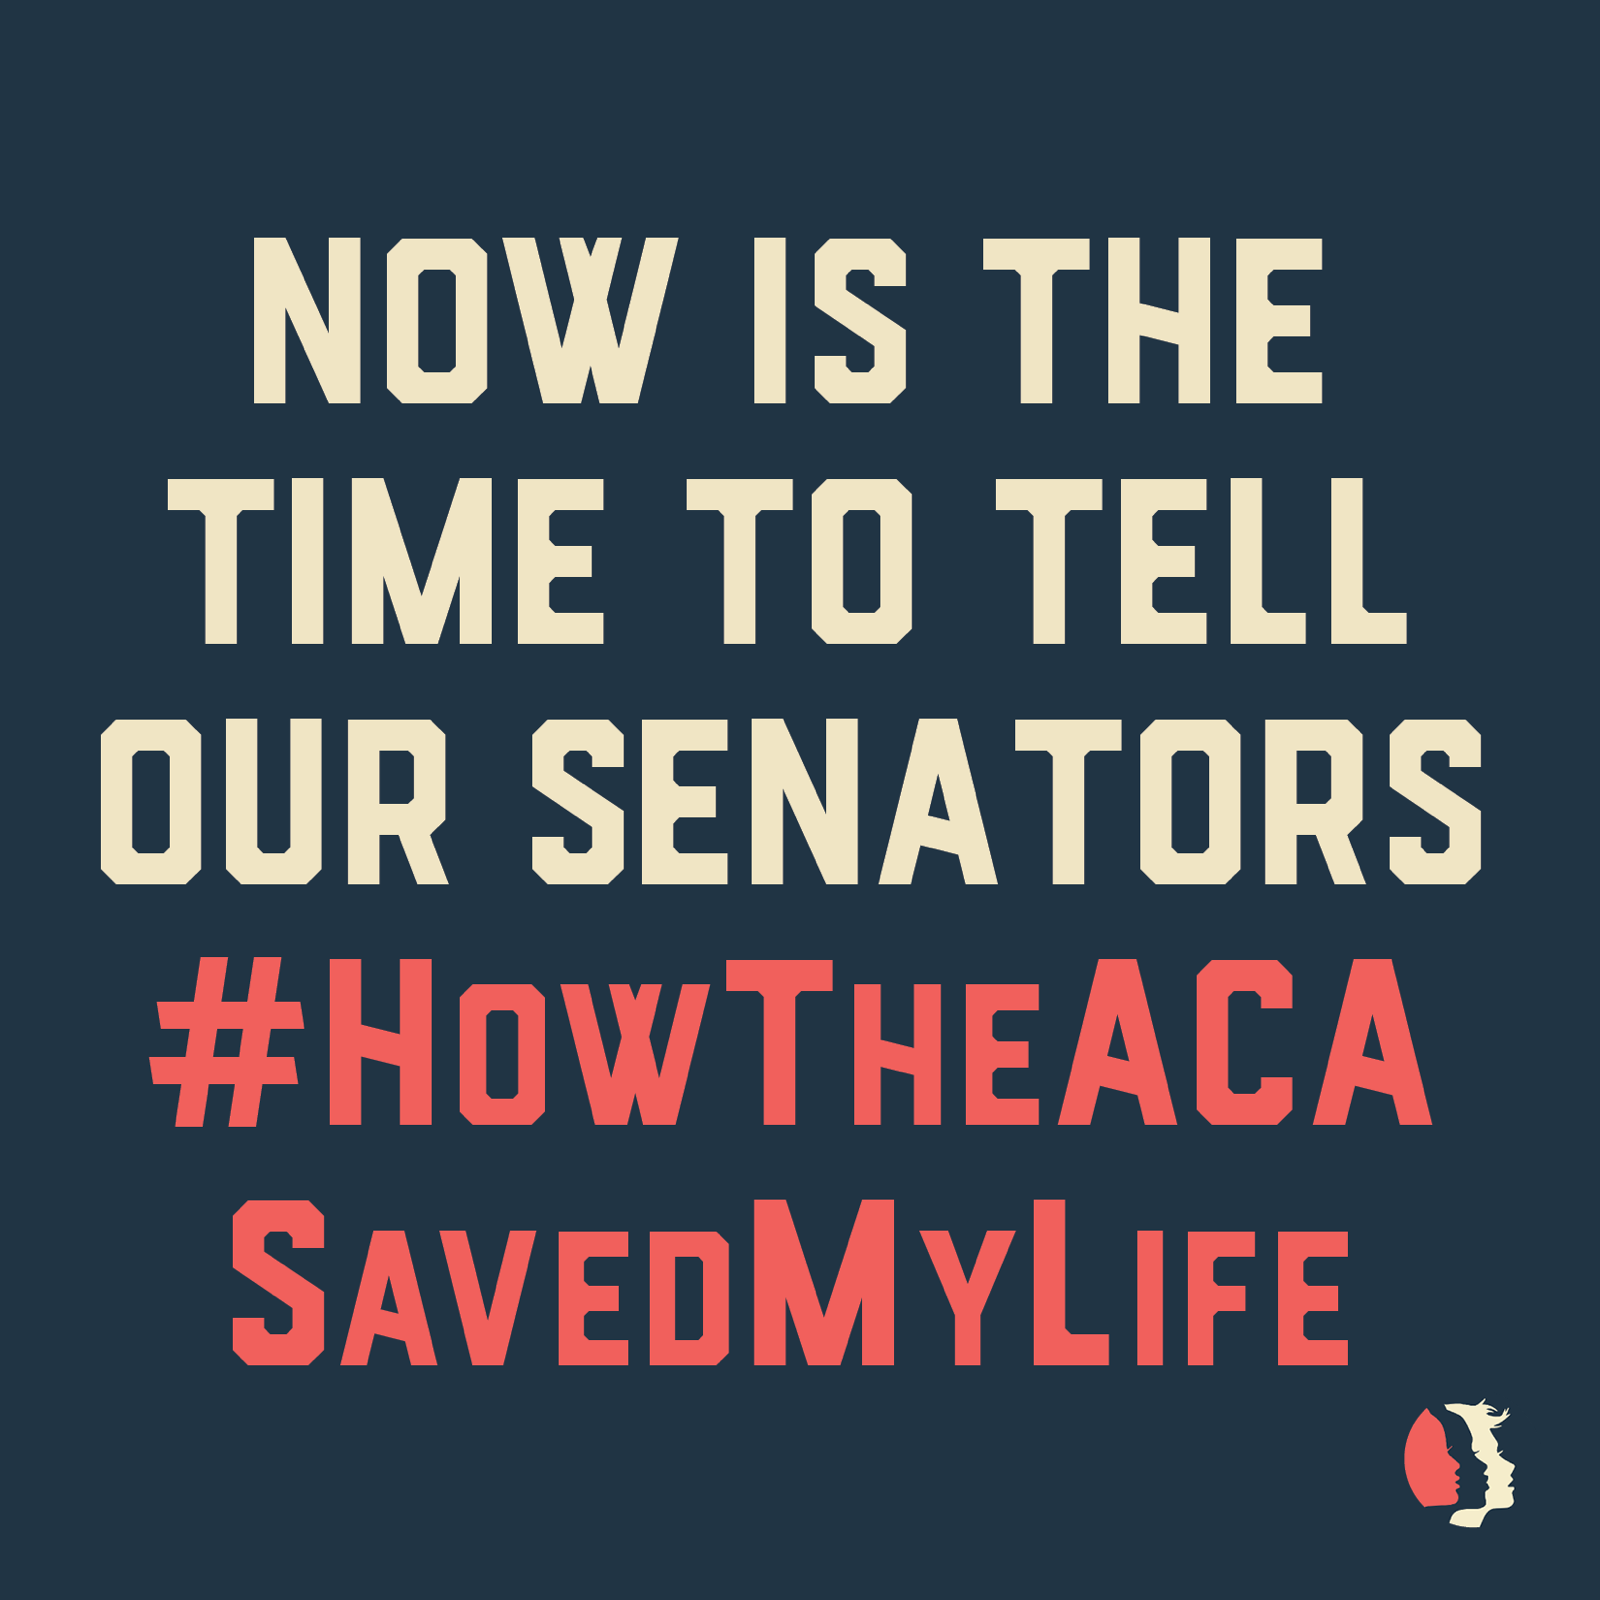 Now is the time to tell our senators #HowTheACASavedMyLife